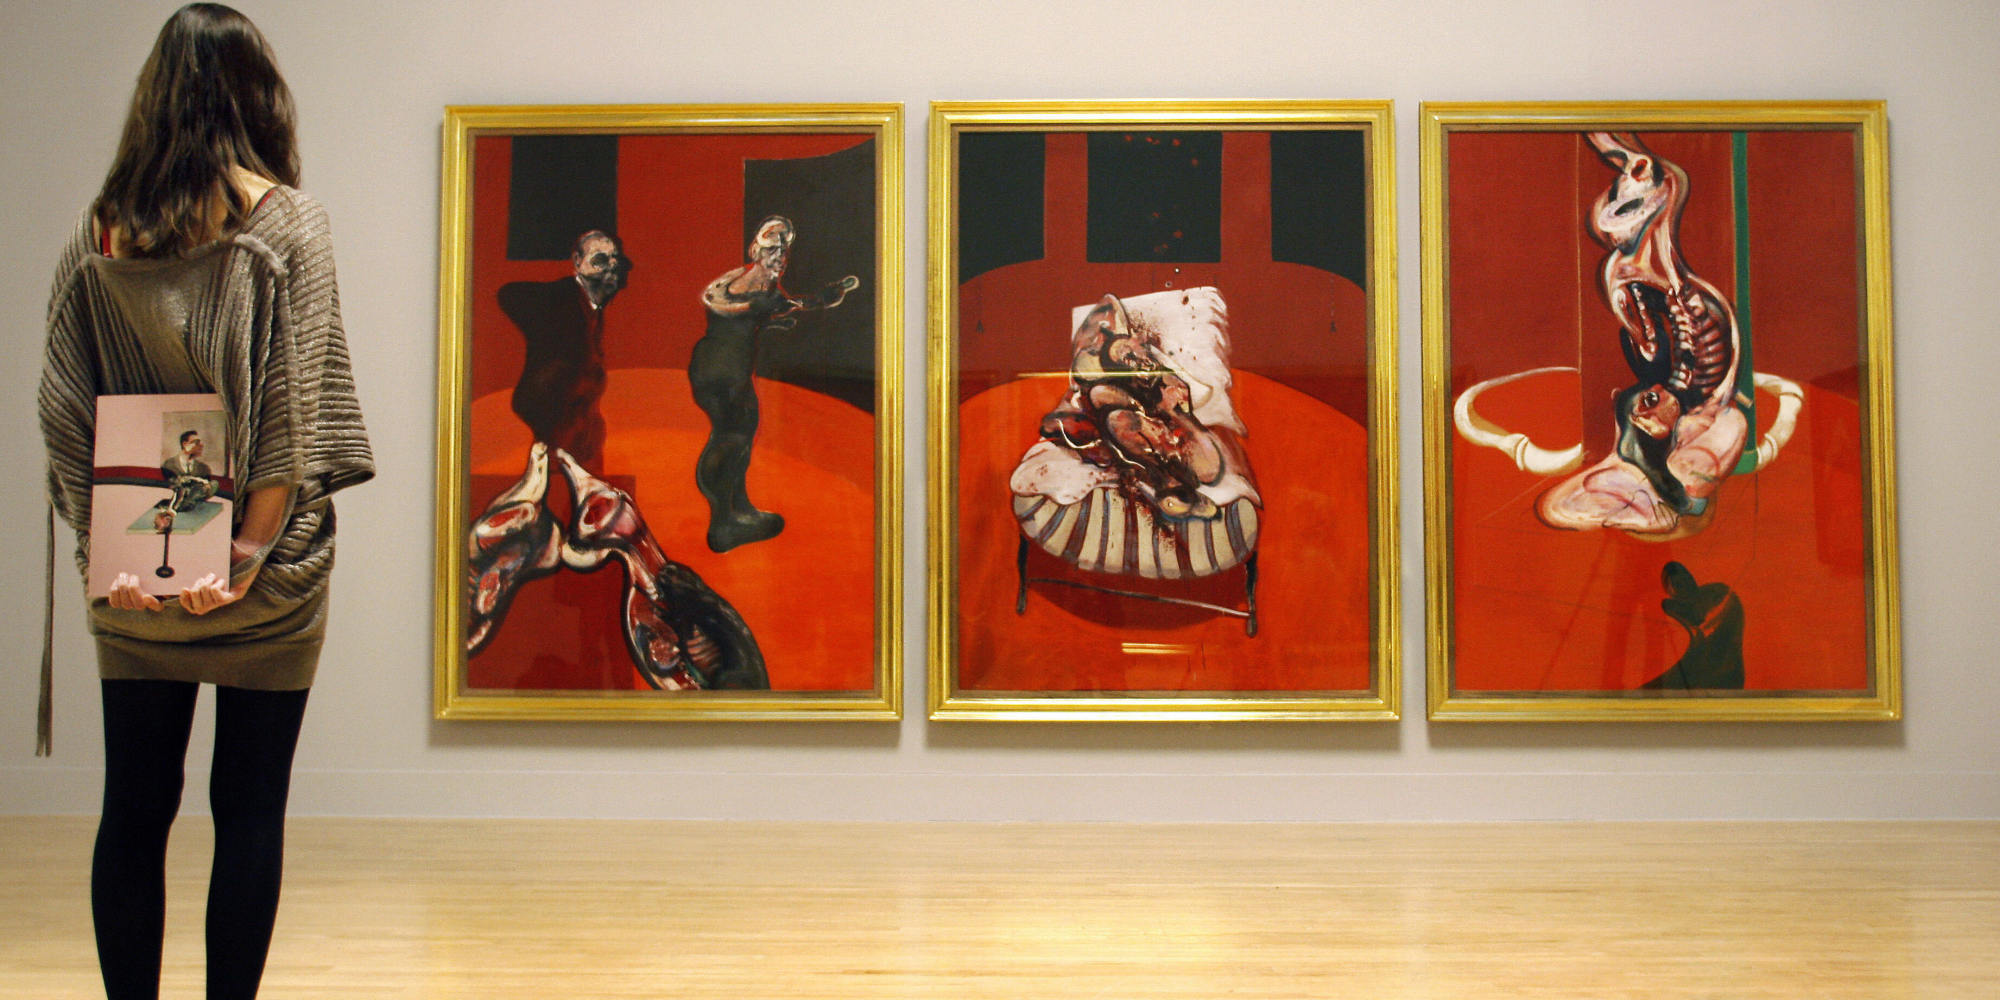 An Idiot's Guide To Francis Bacon, The Man Behind The World's Most